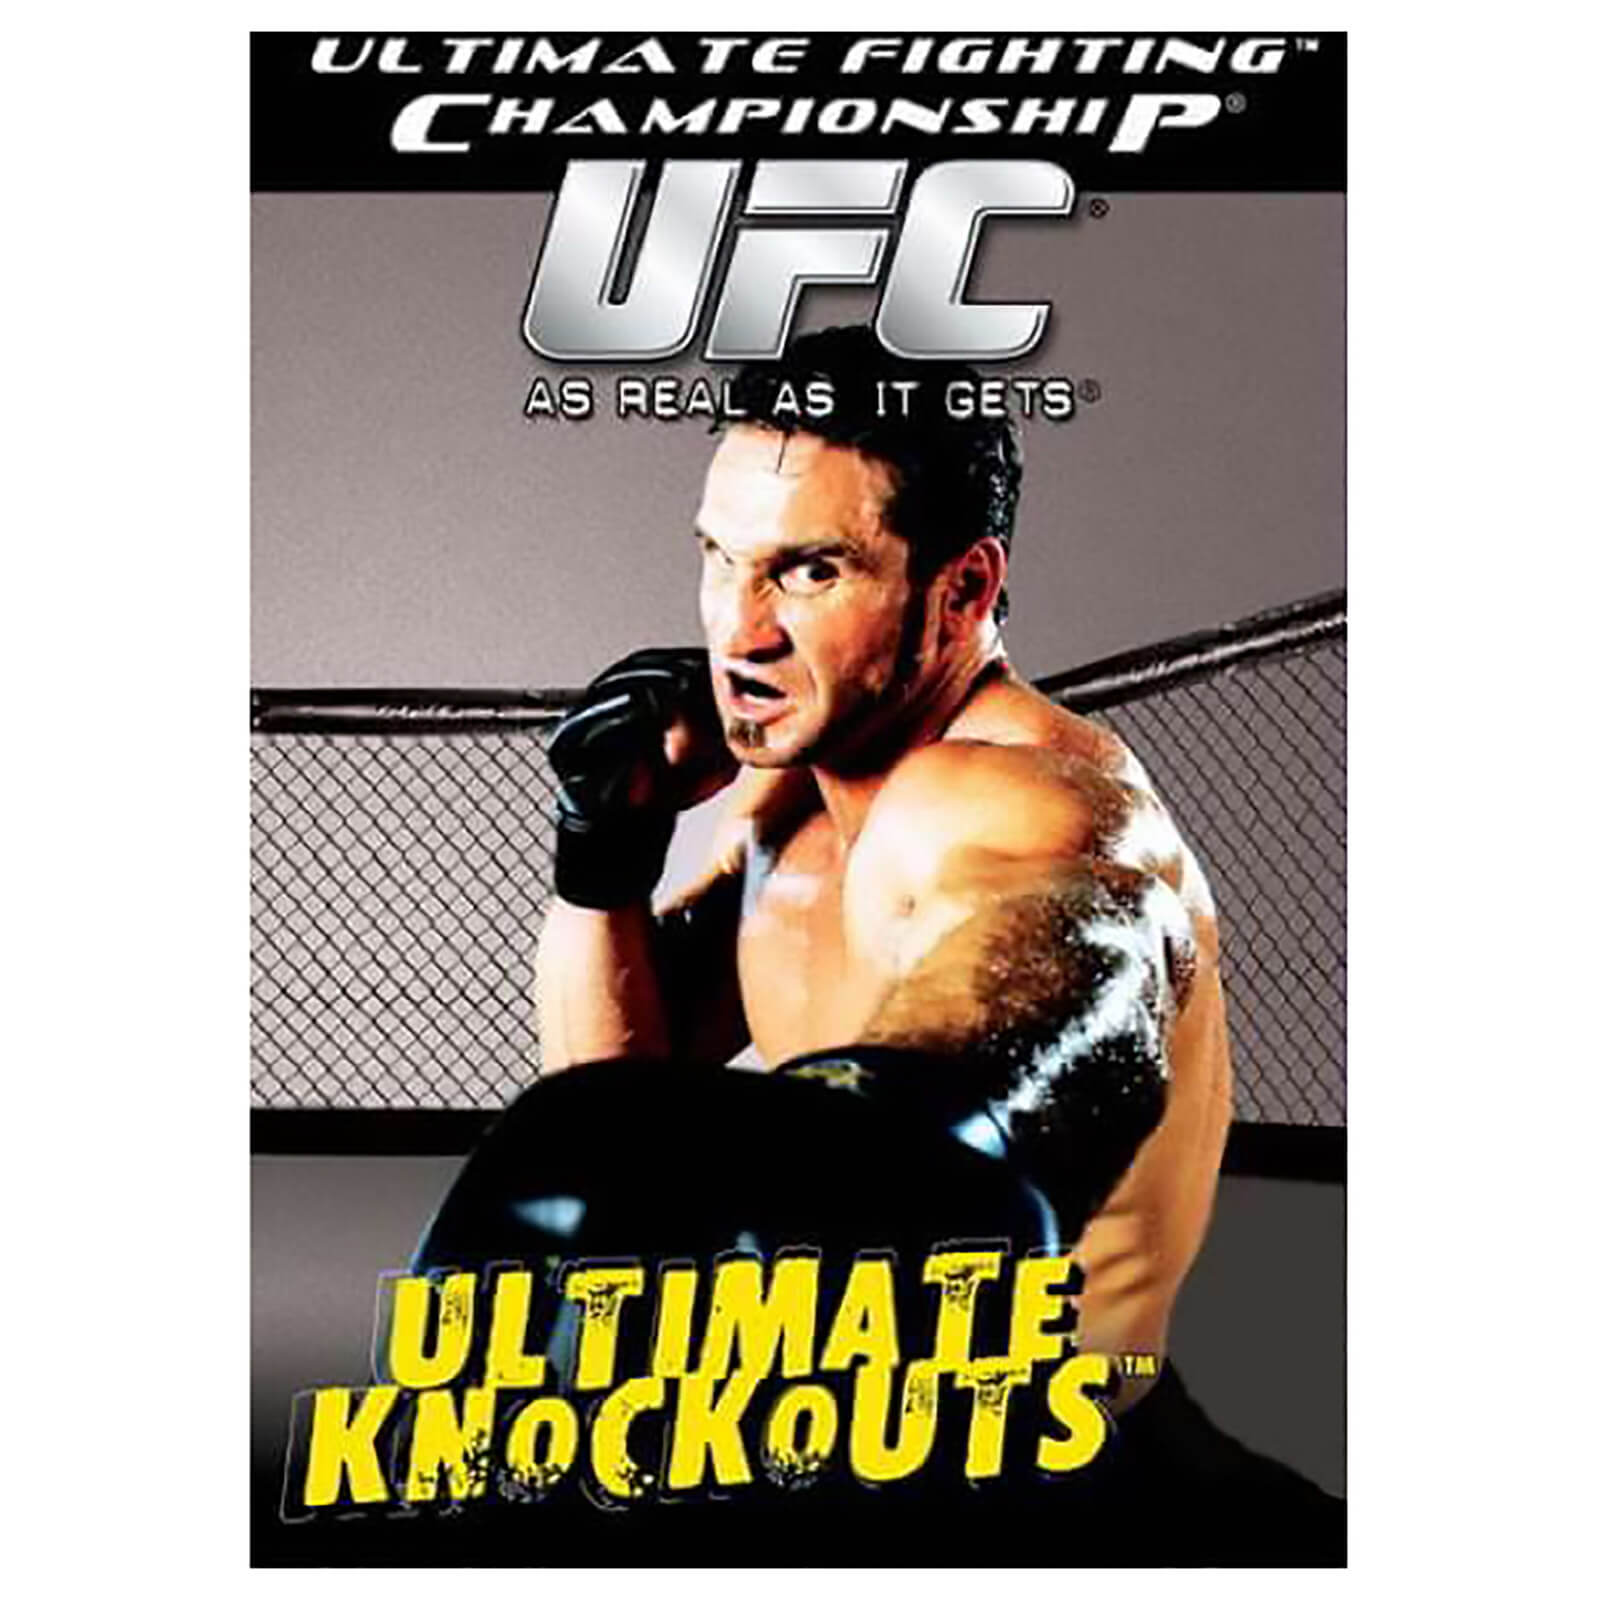 Ultimate Fighting Championship - Ultimate Knockouts 3 von Clear Vision Ltd